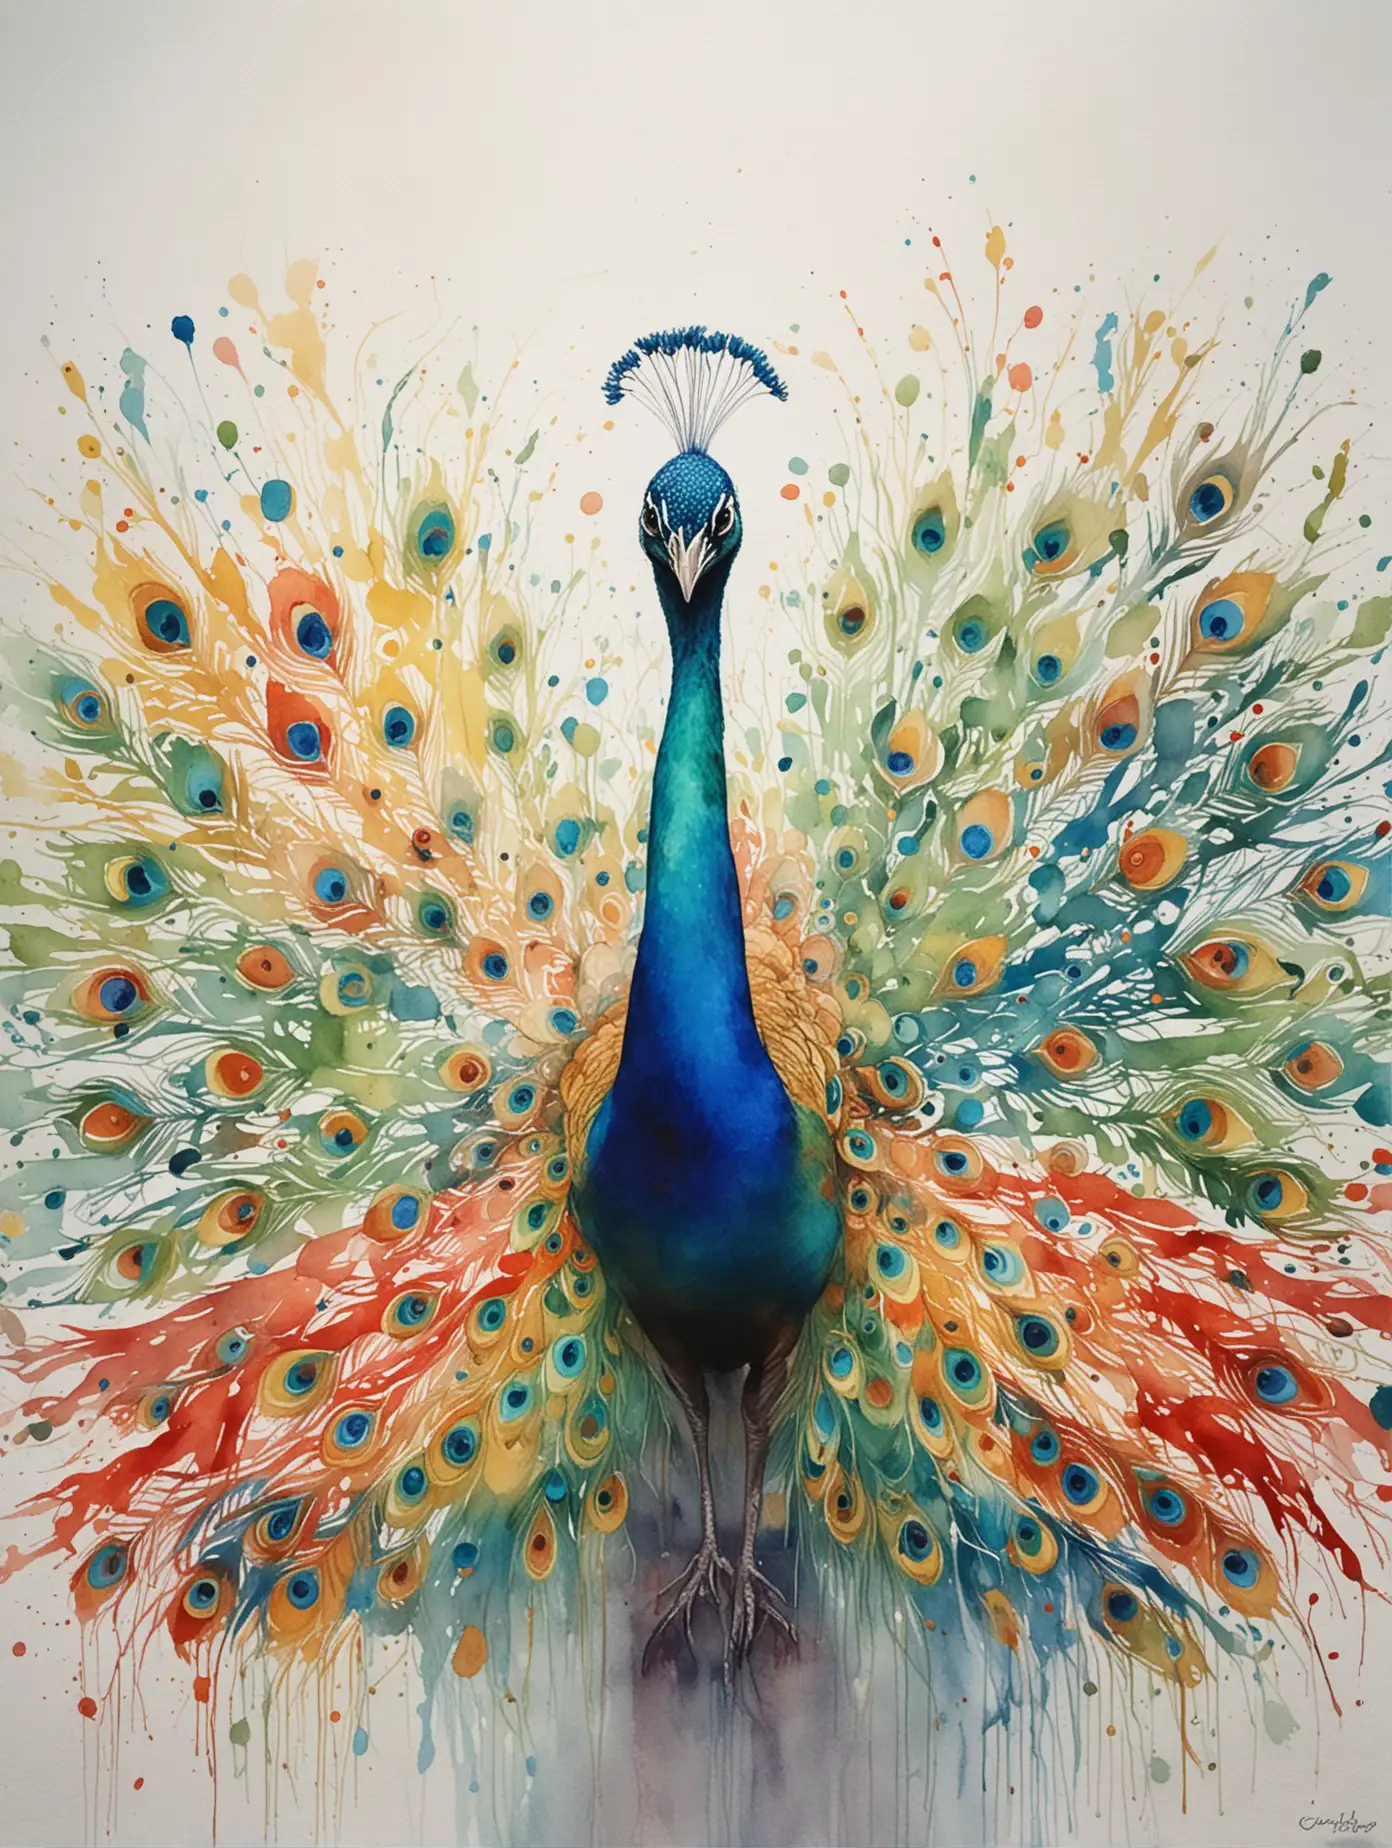 Vibrant Watercolor Illustration of a Peacock